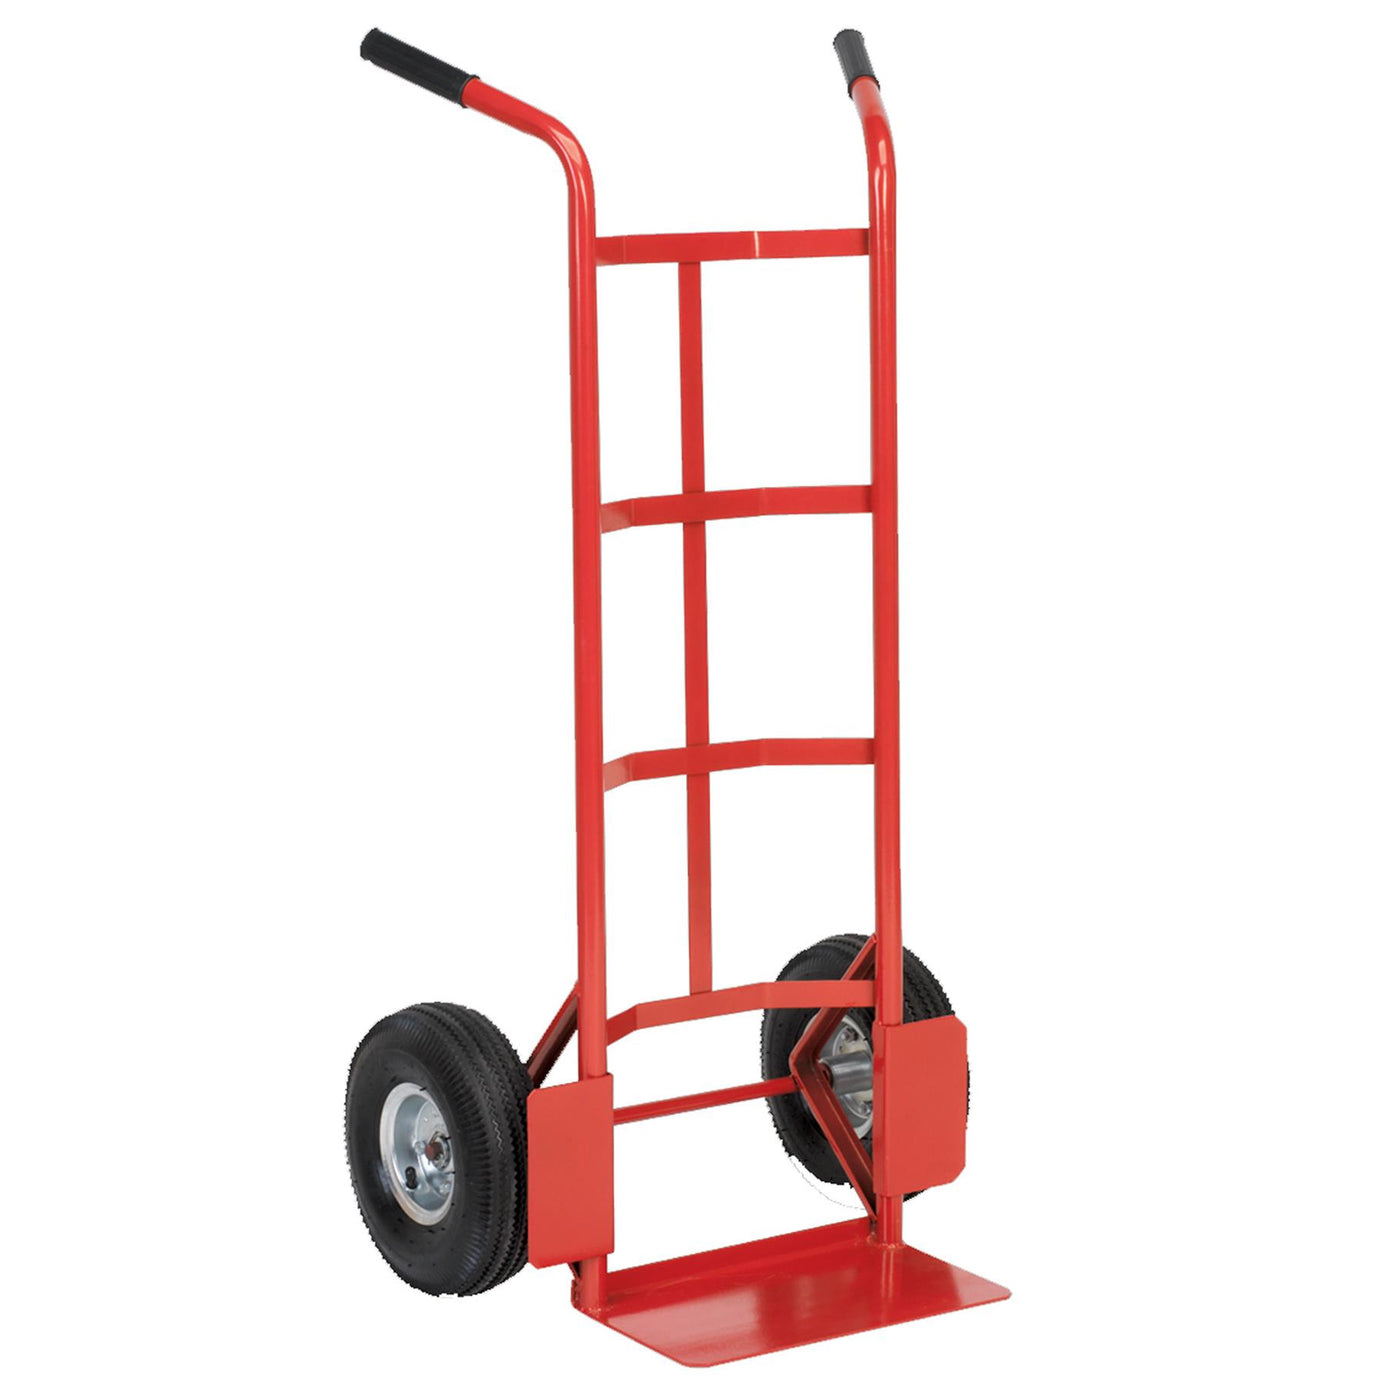 Sealey Sack Truck with Pneumatic Tyres 200kg Capacity - CST986